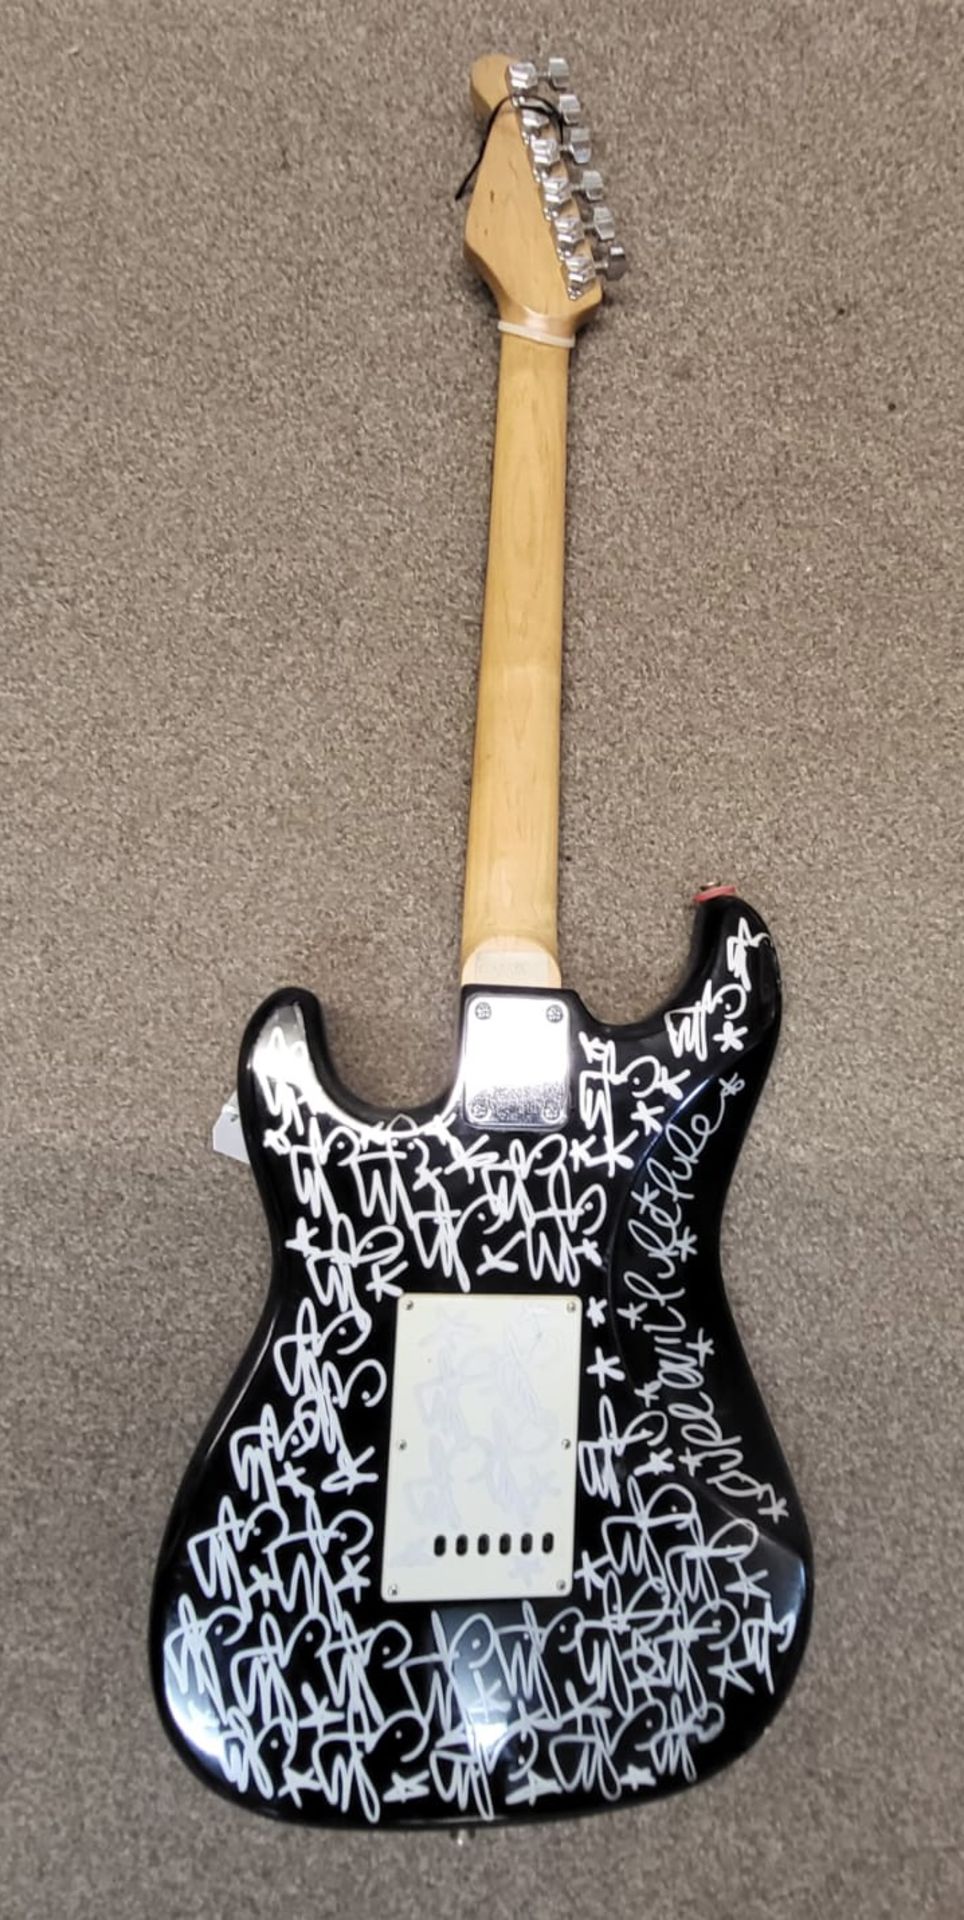 Simply Incredible ONE OFF MULTI-SIGNED Fender Style Guitar by PURE EVIL with COA - Image 2 of 4